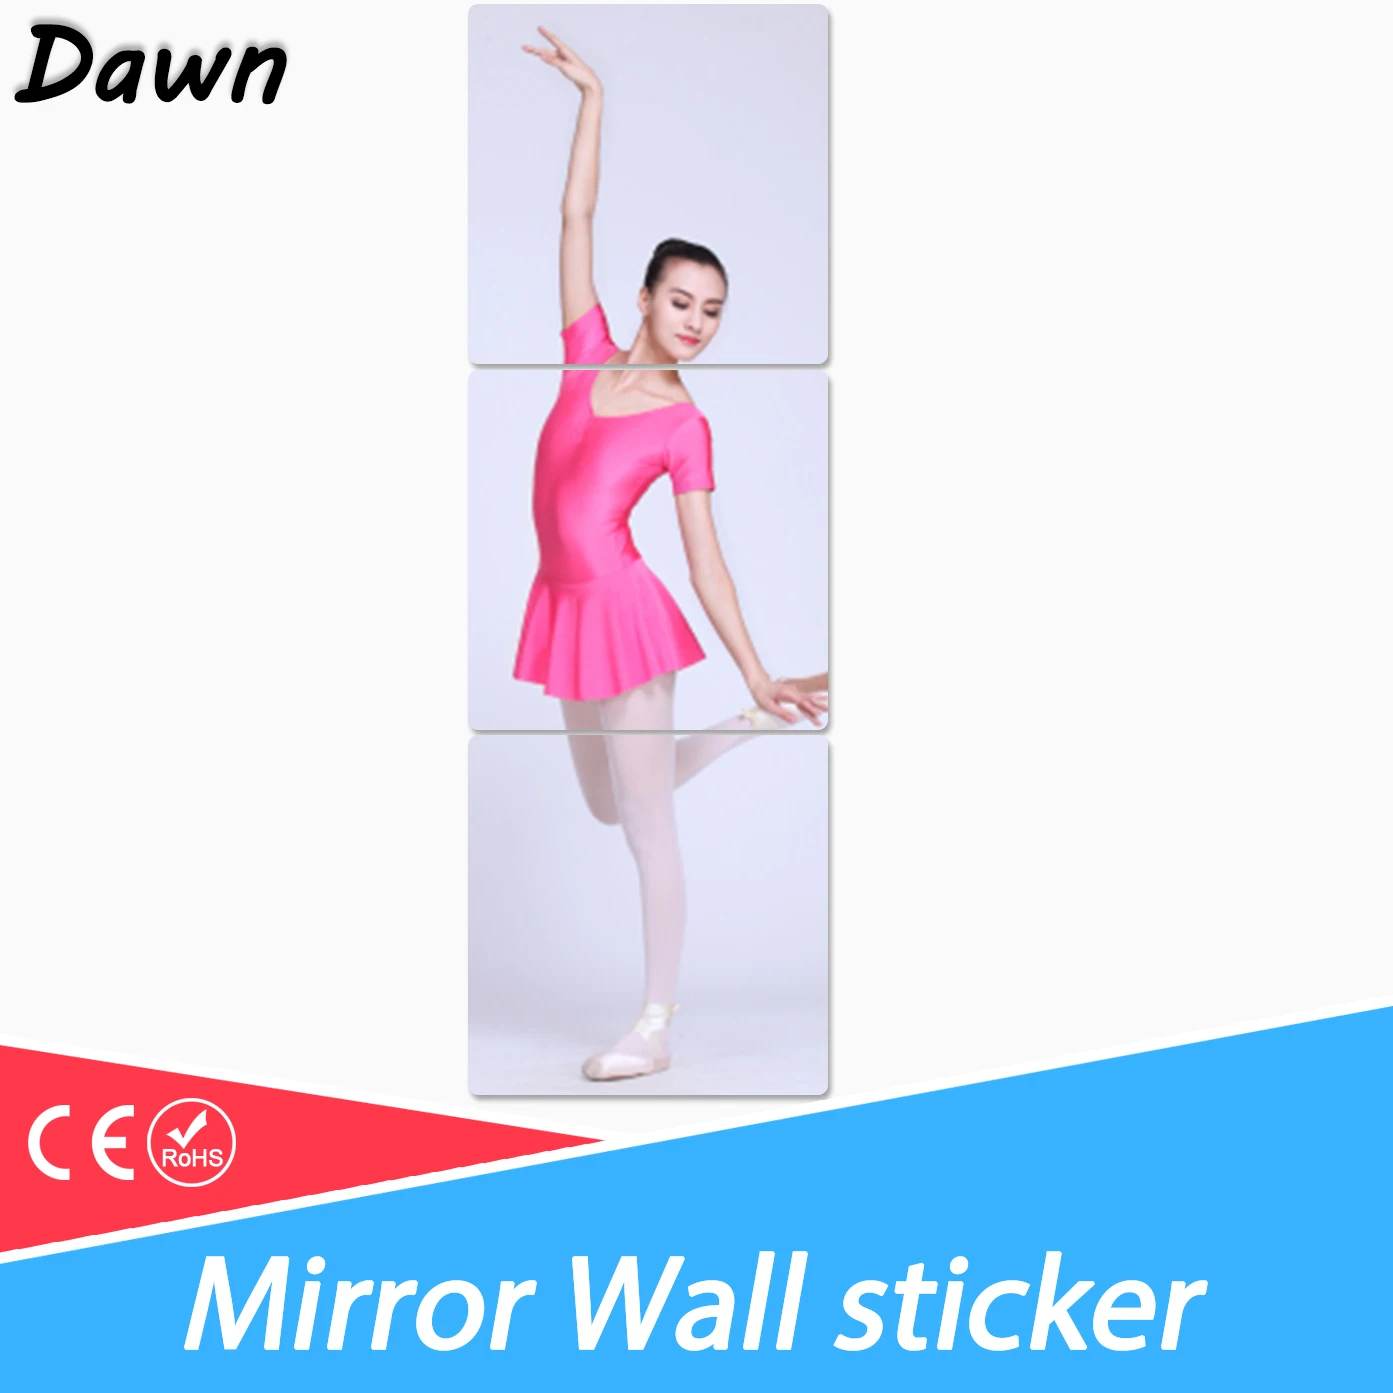 Mirror Self-adhesive Stickers Square Mirror Wall Sticker 30*30cm waterproof DIY 3D Wall Decal Living Room Bathroom Decoration